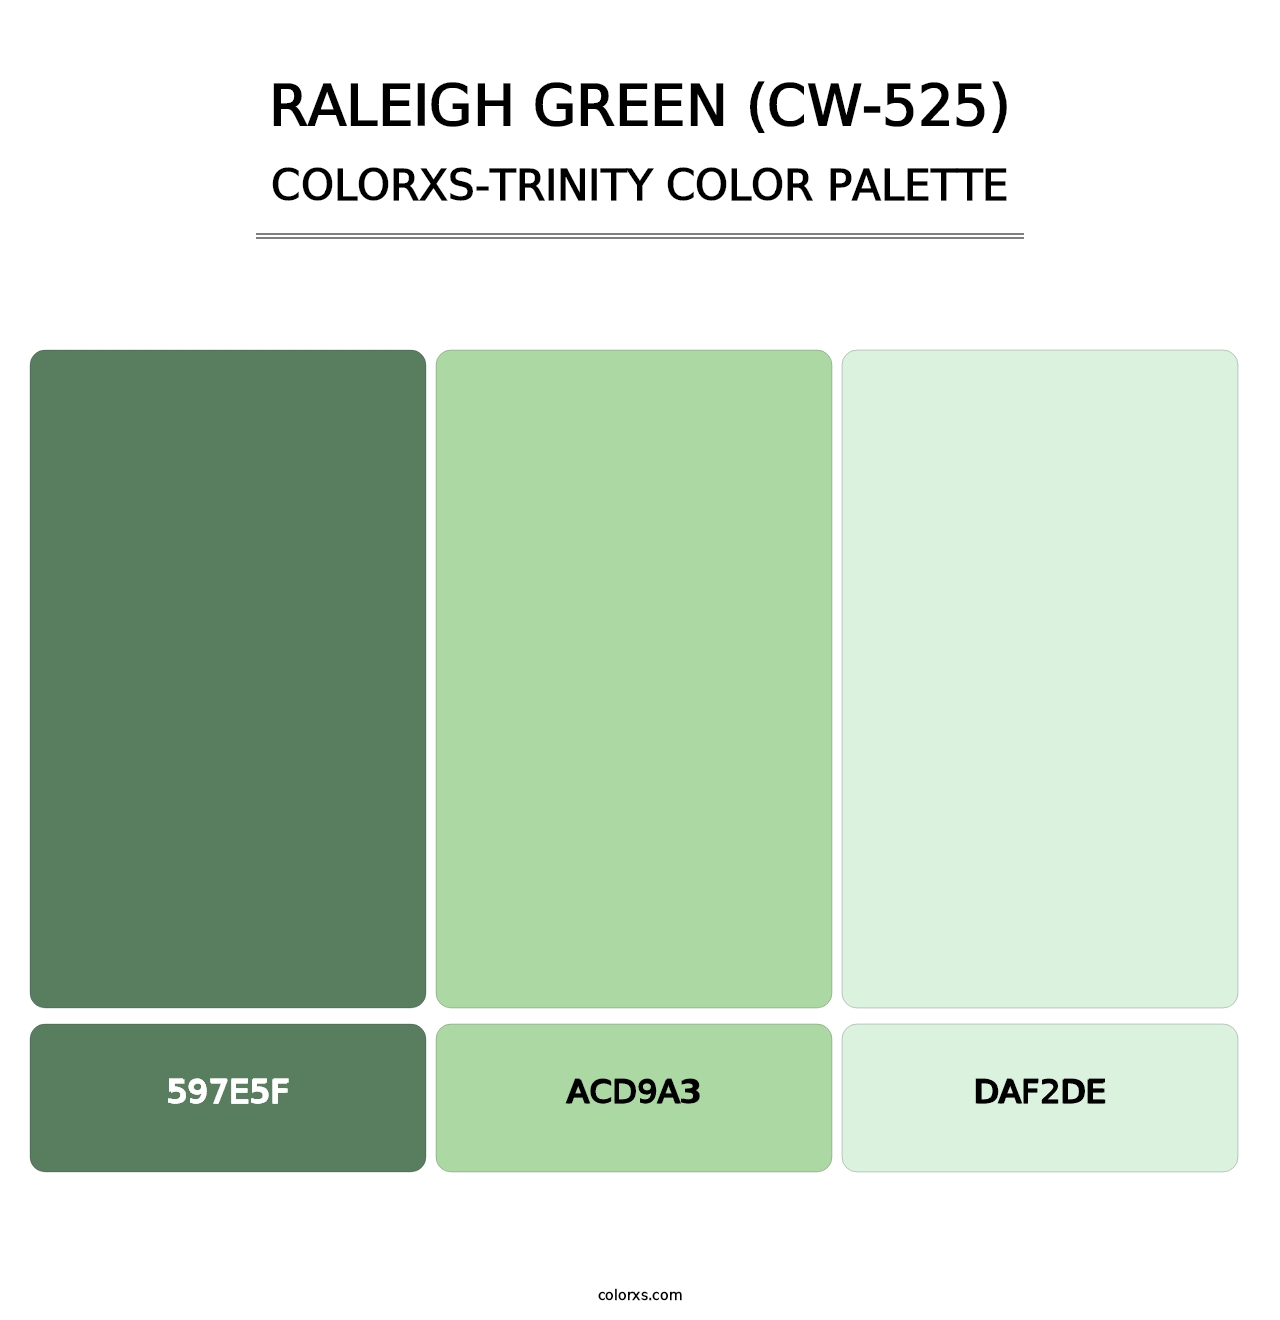 Raleigh Green (CW-525) - Colorxs Trinity Palette